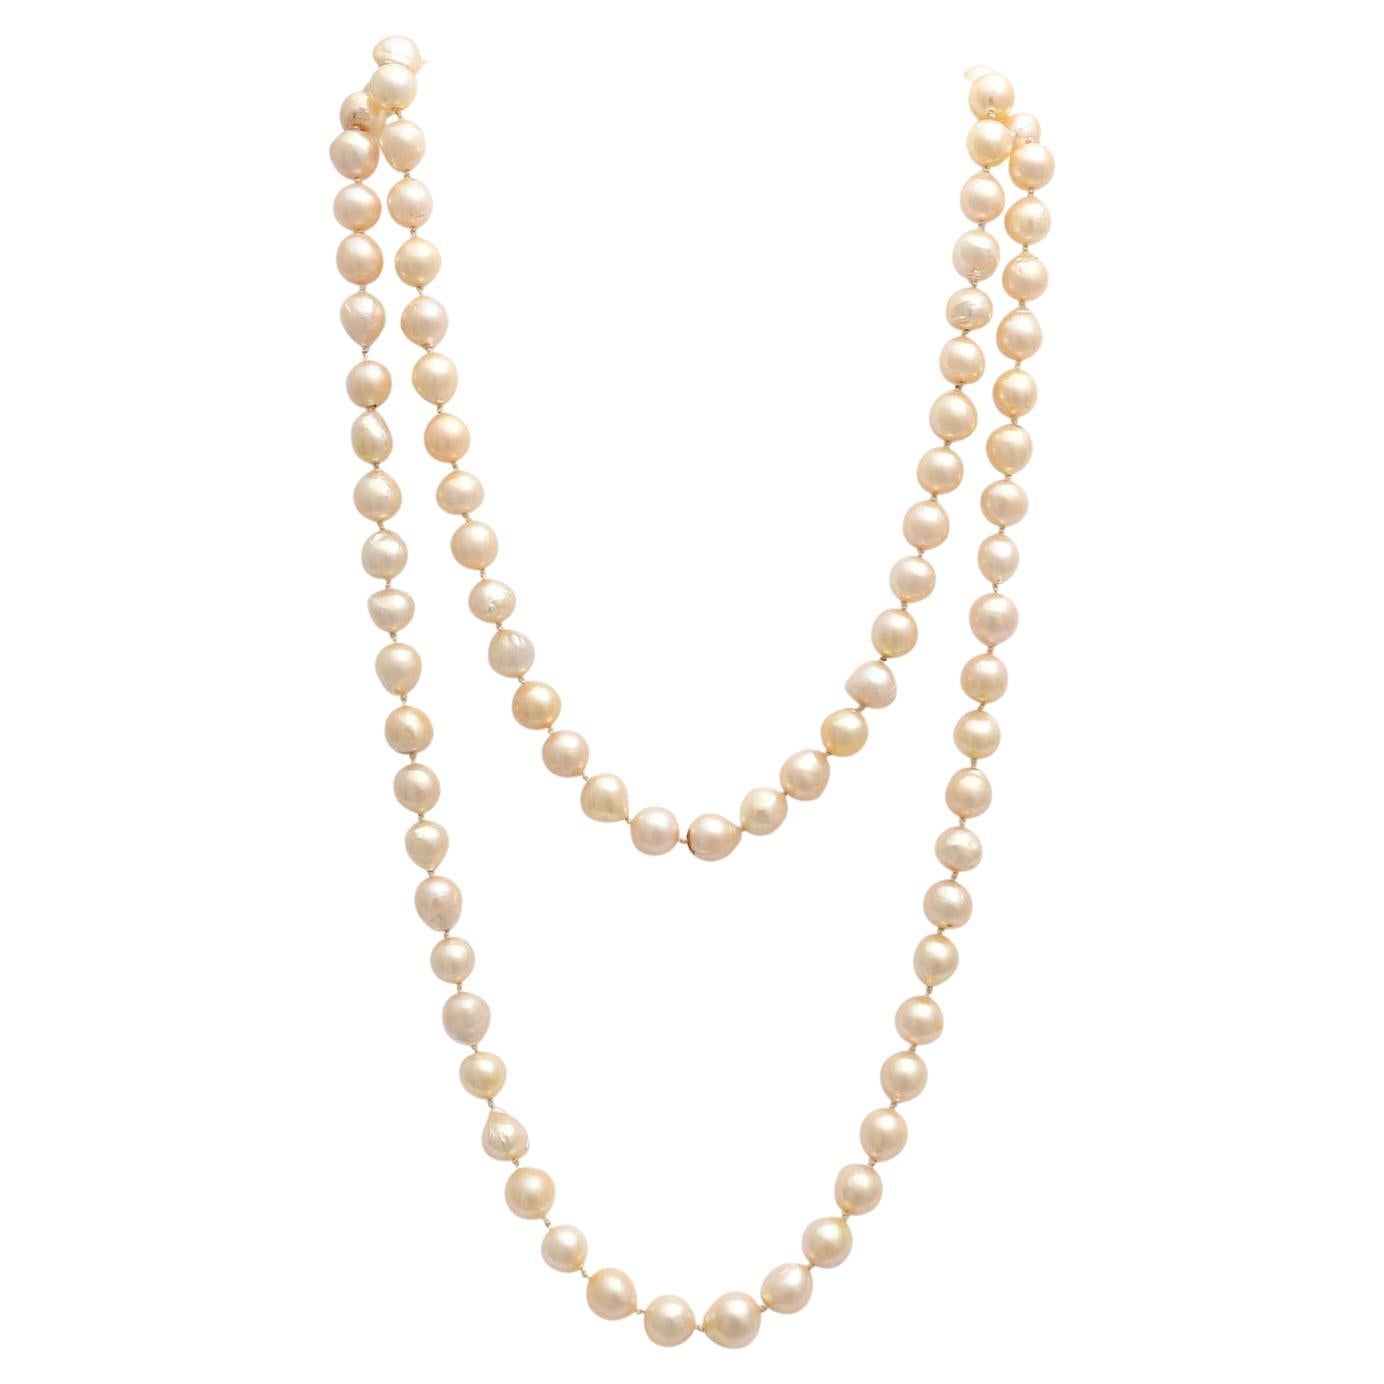 Long Necklace of Akoya Pearls For Sale